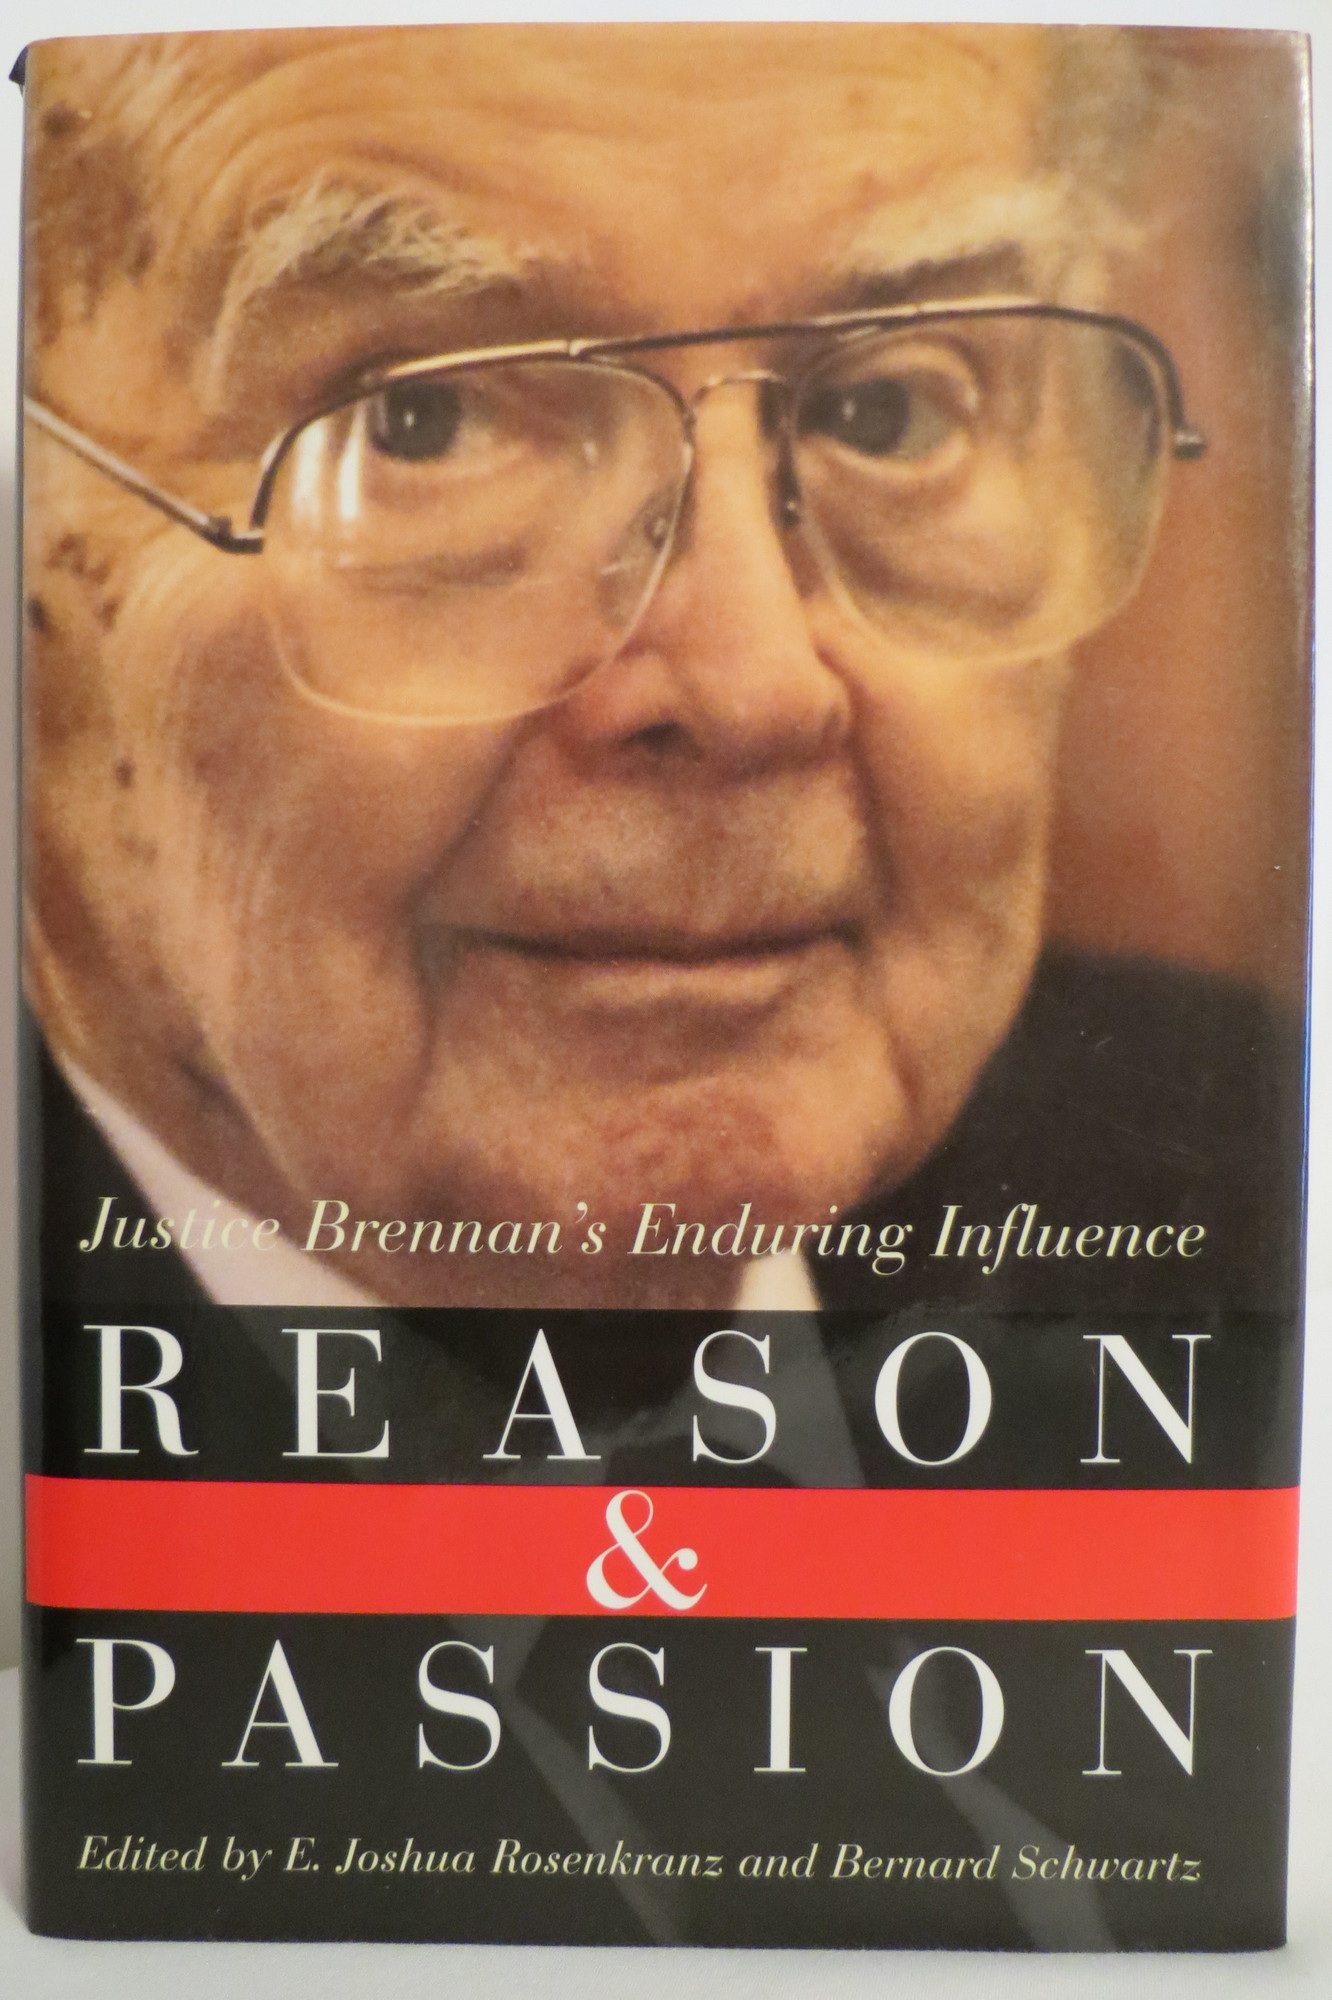 Image for REASON AND PASSION Justice Brennan's Enduring Influence (DJ protected by clear, acid-free mylar cover)